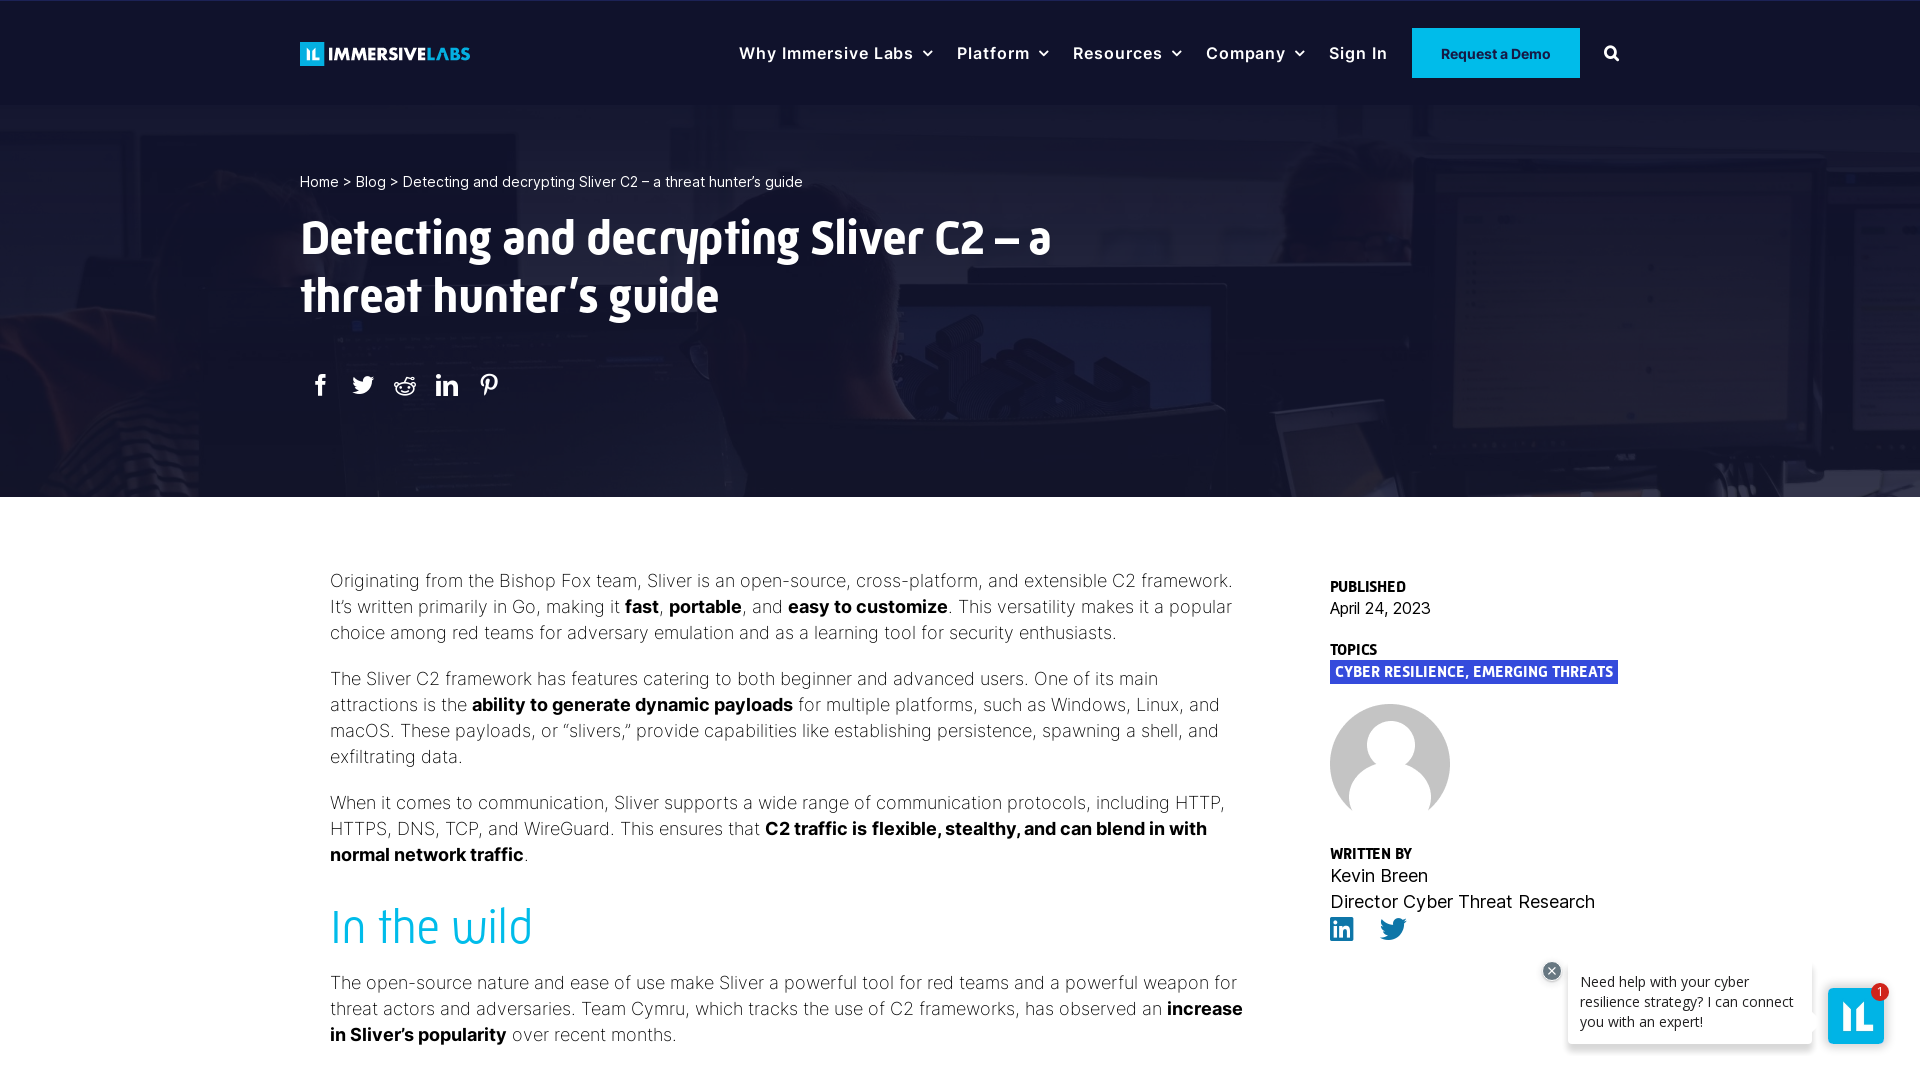 Detecting and decrypting Sliver C2 – a threat hunter's guide - Immersive Labs